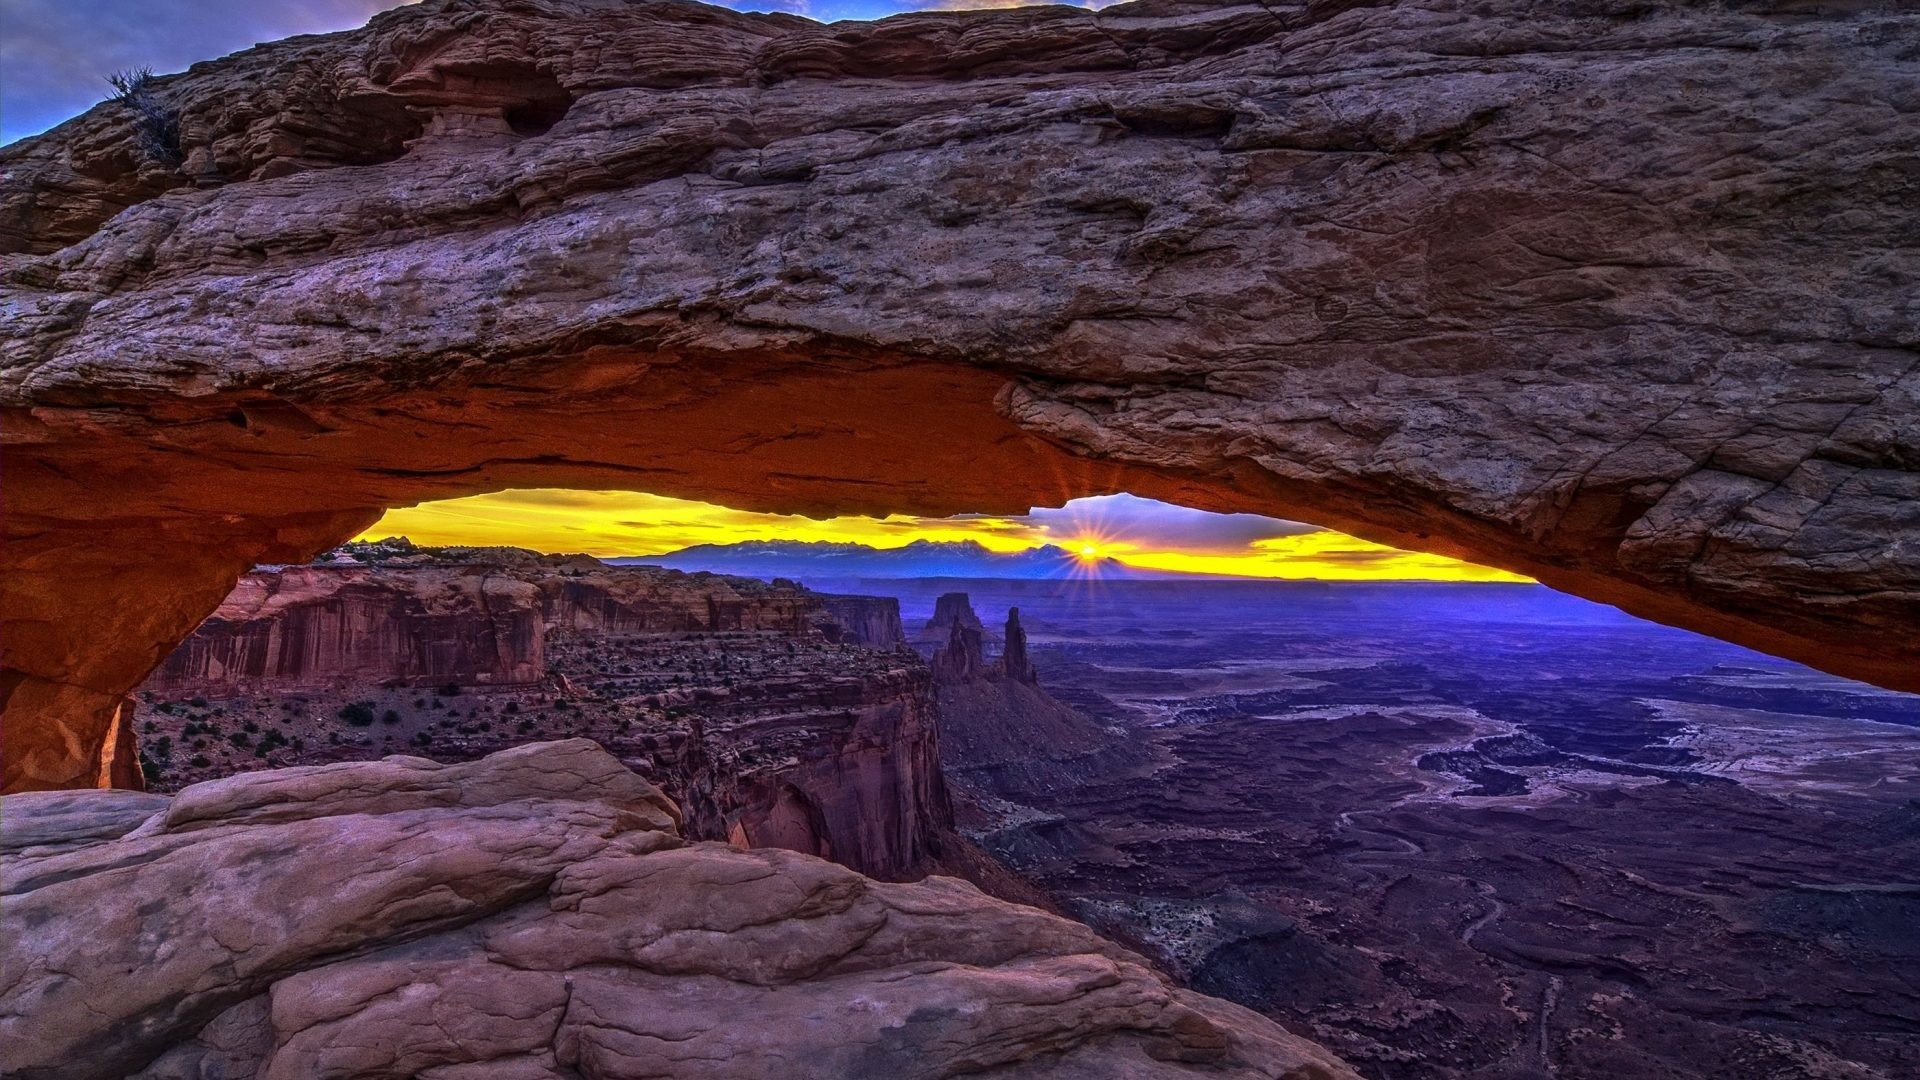 Arches Tag Arches Desert Moab Sunrise Landscape Utah Mountains Sunset Park Near National Nature Wallpapers 1920x1080